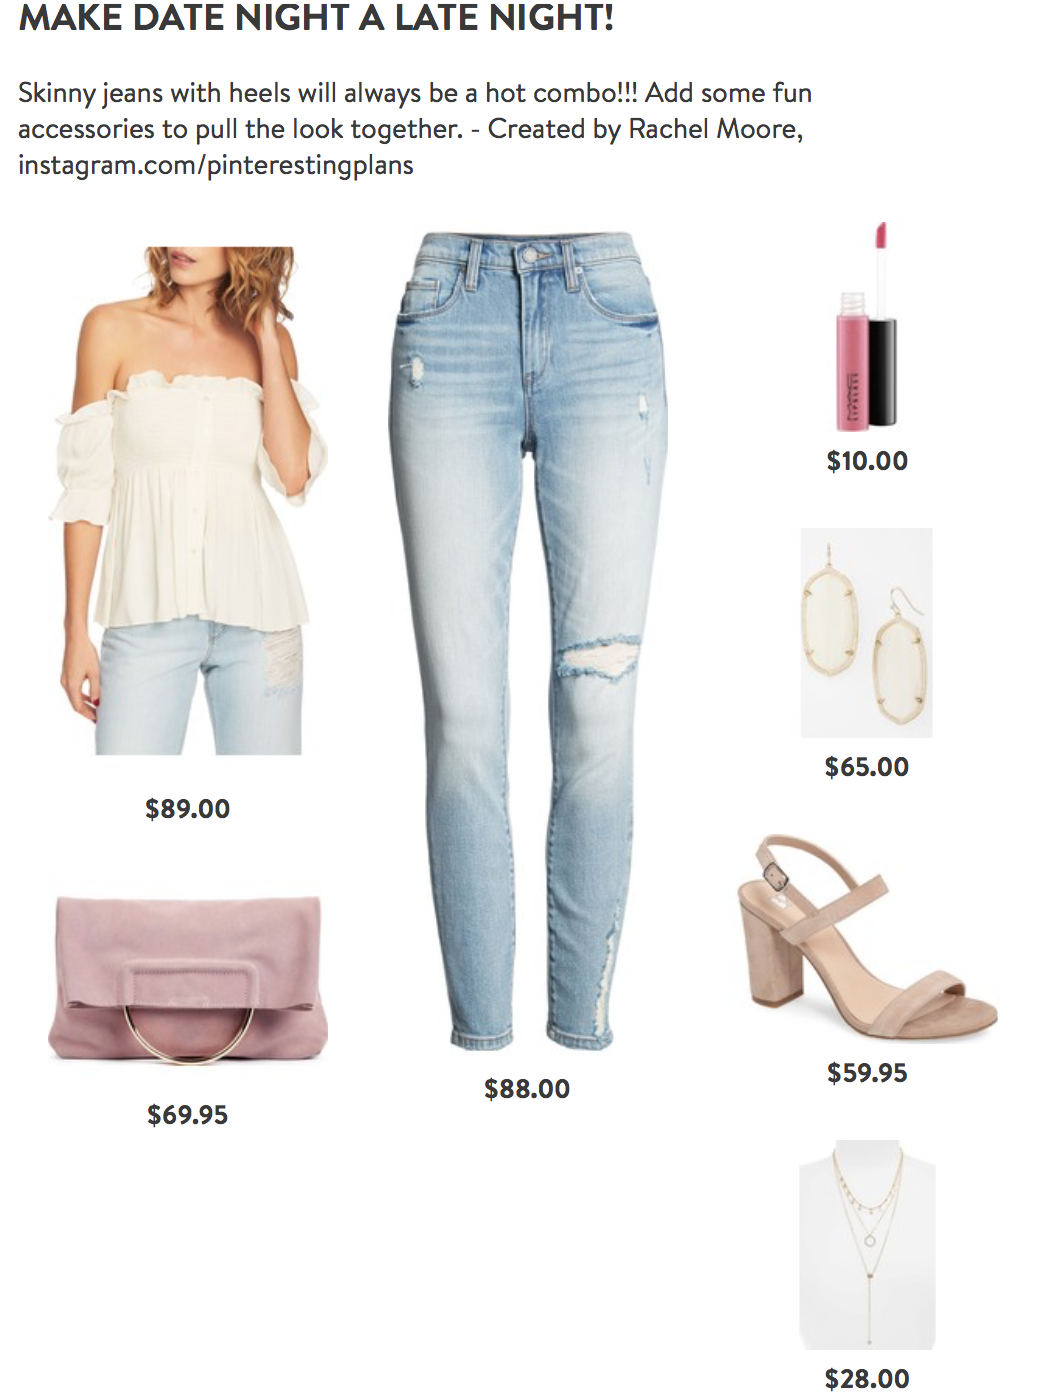 Spring Date Night Outfit On Pinteresting Plans Fashion Blog